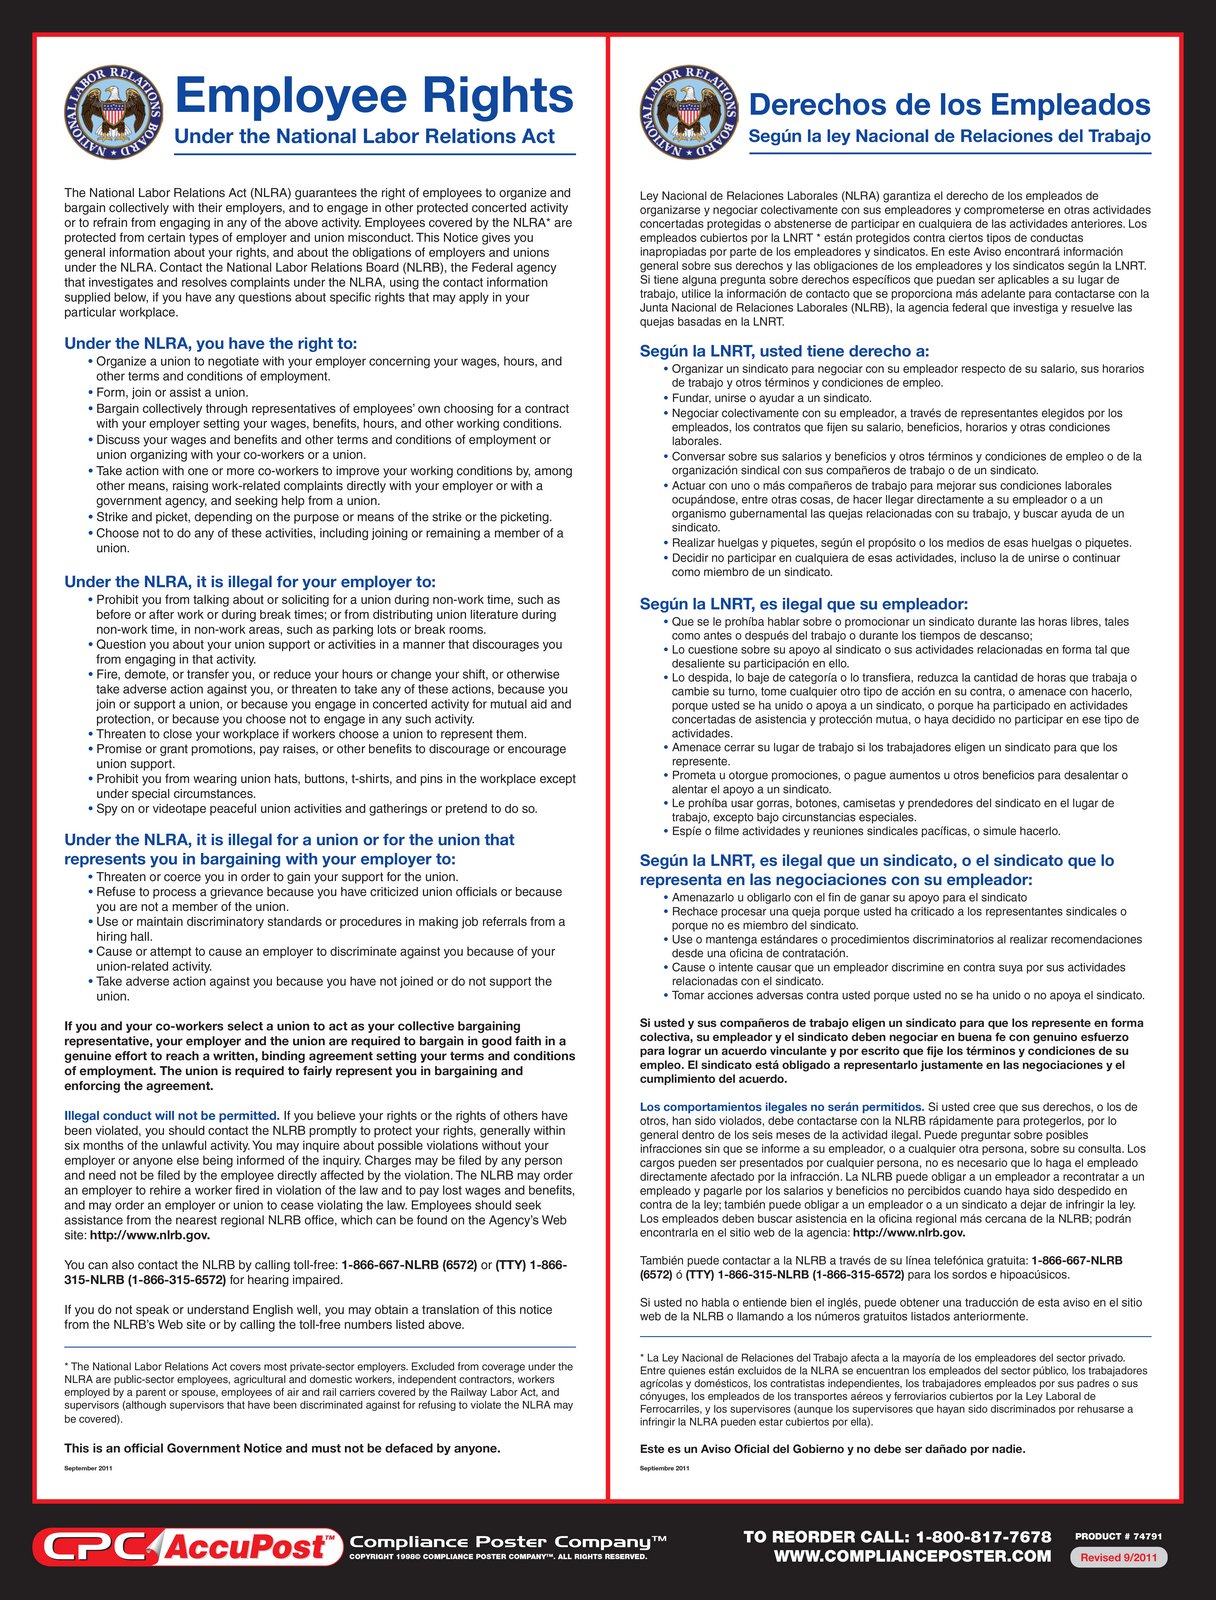 National Labor Relations Act (NLRA) Posters